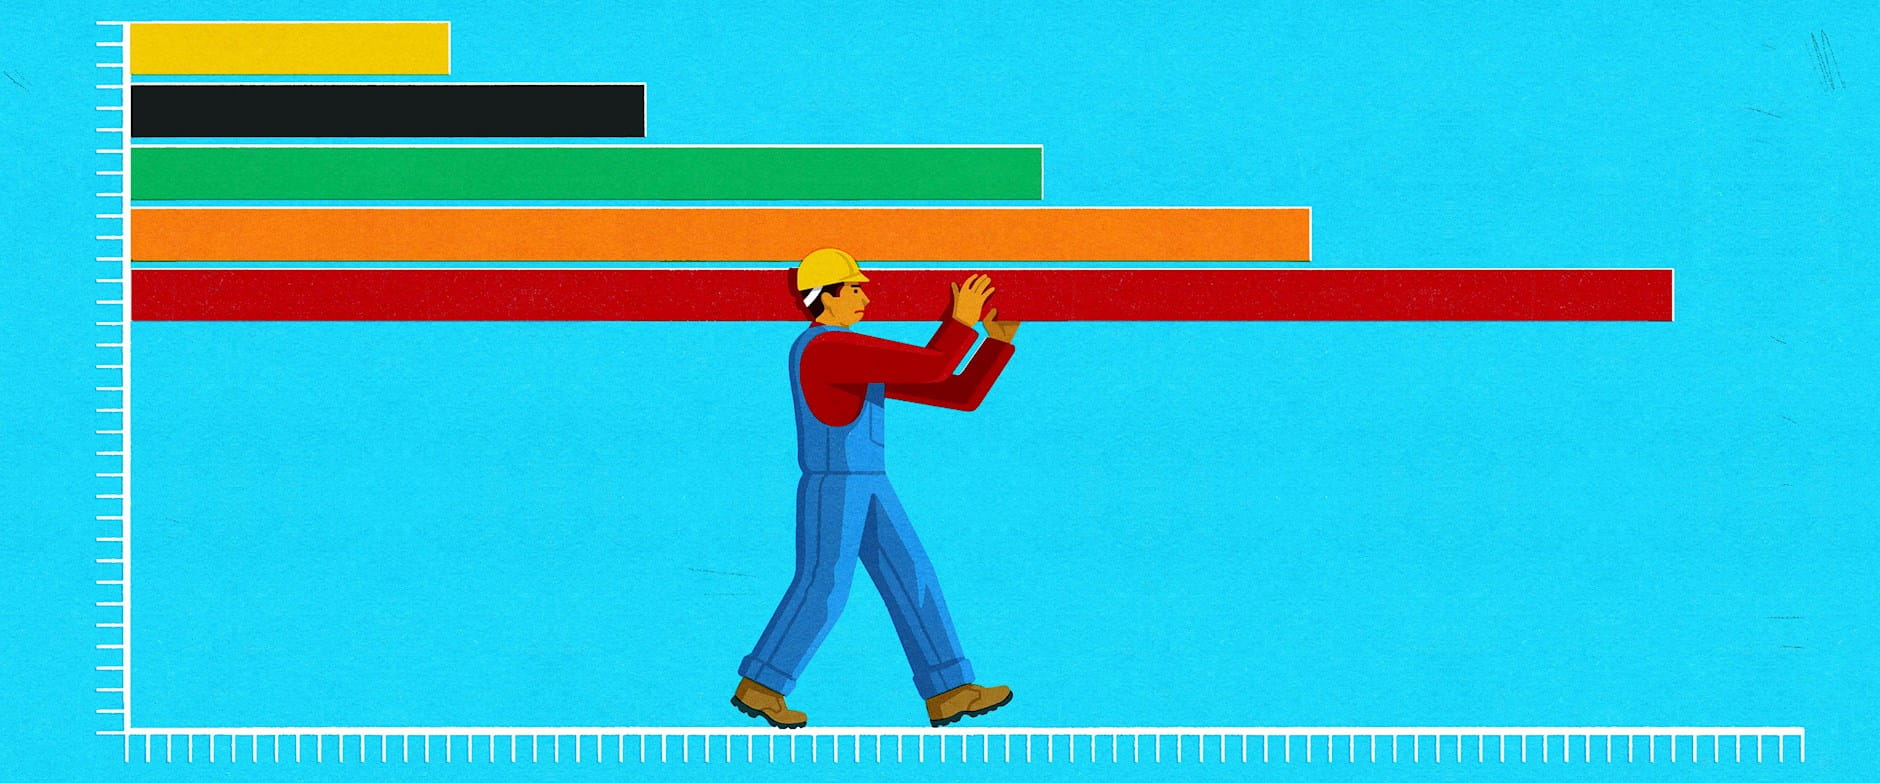 Construction worker carrying beams that look like a bar chart